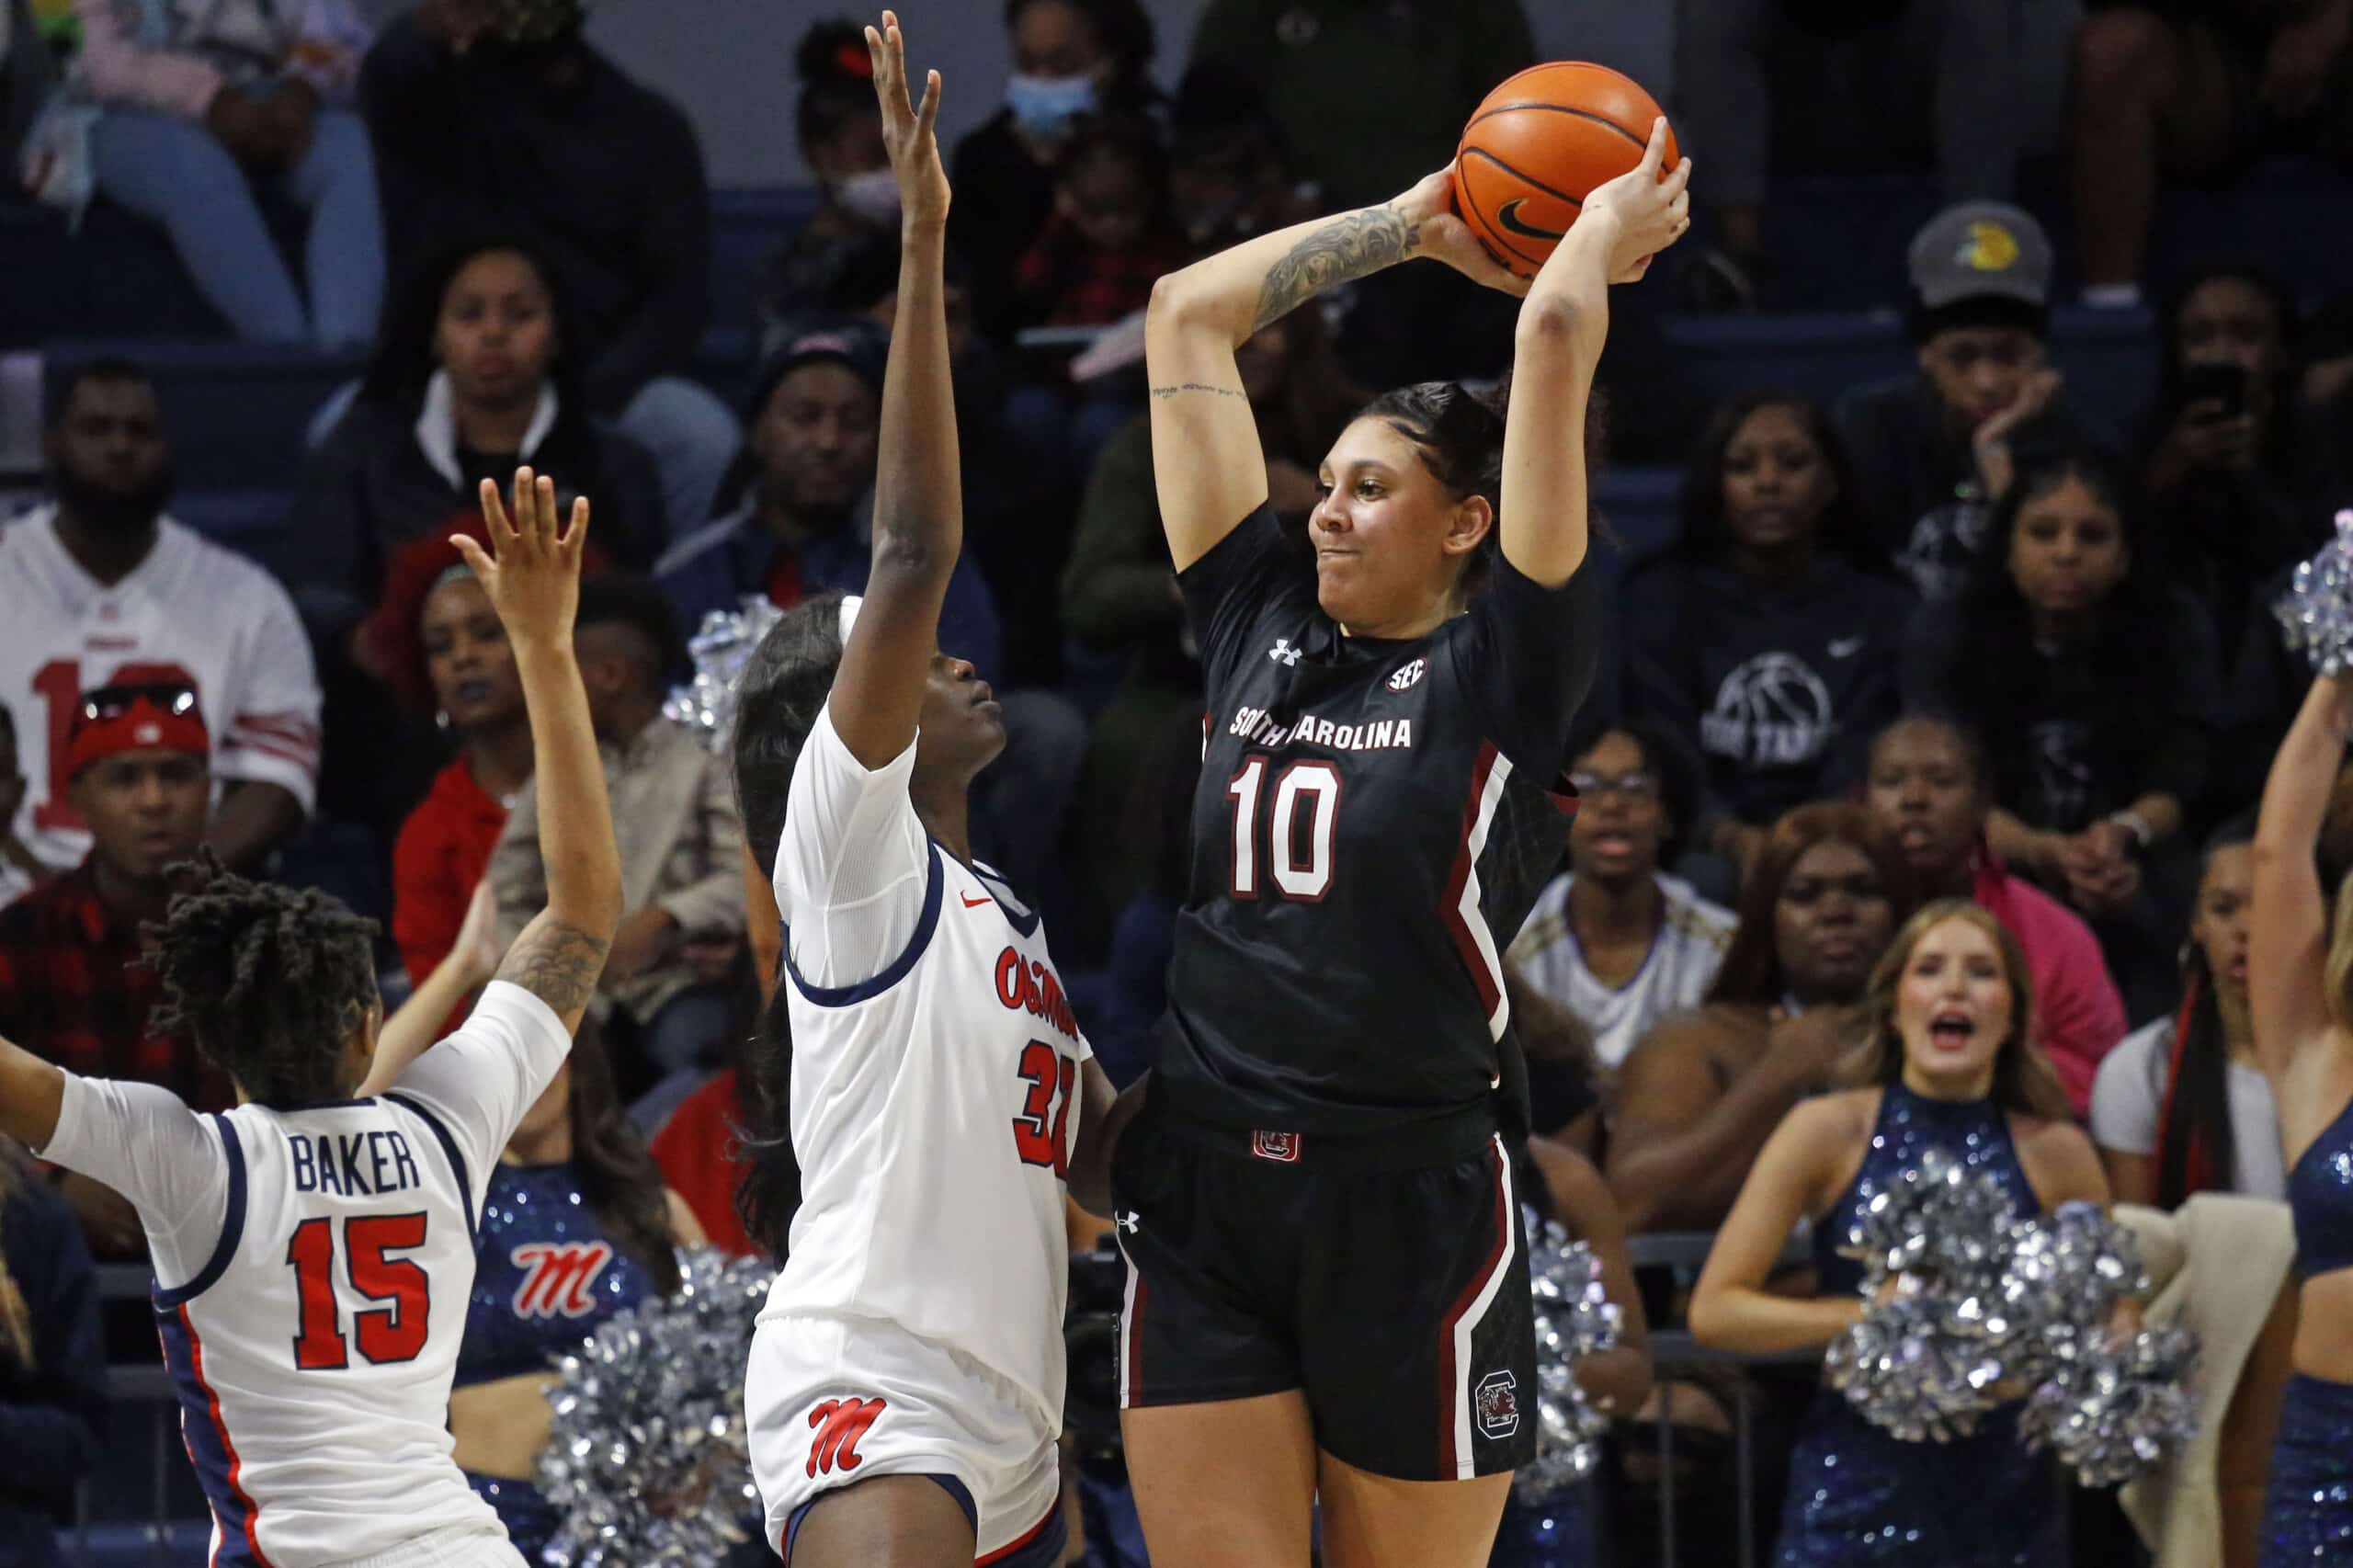 South Carolina Gamecocks center Kamilla Cardoso (10) handles the ball as Mississippi Rebels center Rita Igbokwe (32) defends during the second half at The Sandy and John Black Pavilion at Ole Miss.